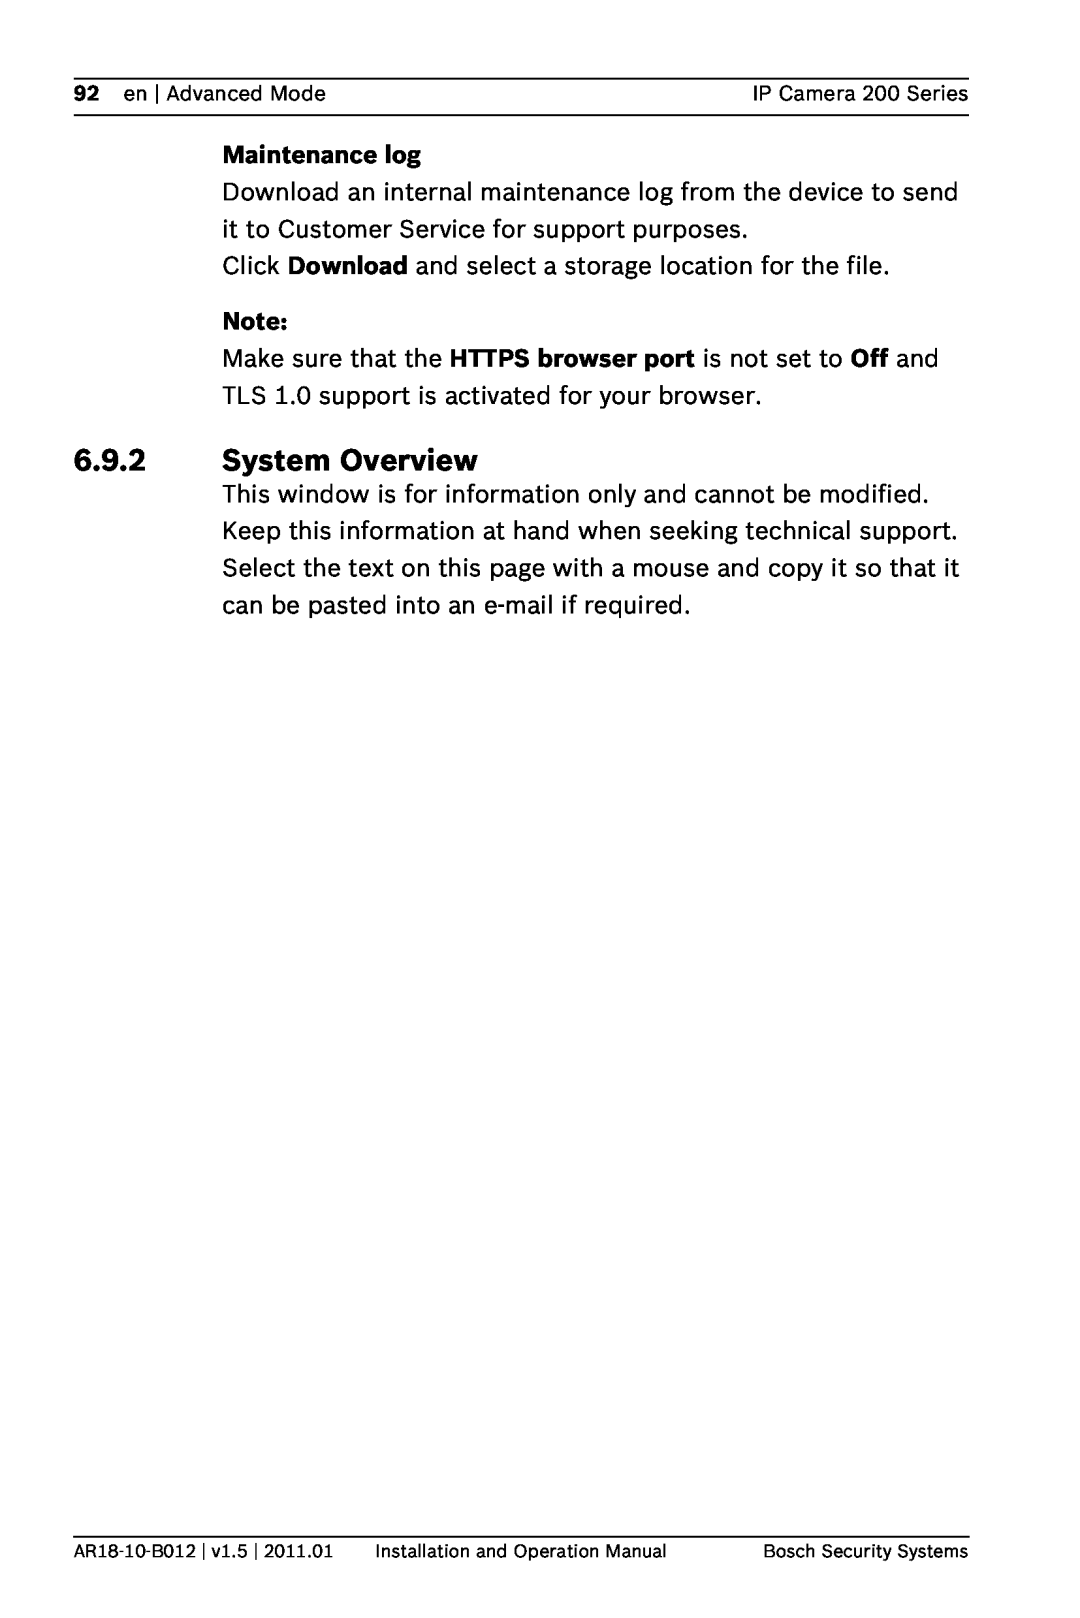 Bosch Appliances NDC-265-P operation manual System Overview, Maintenance log 